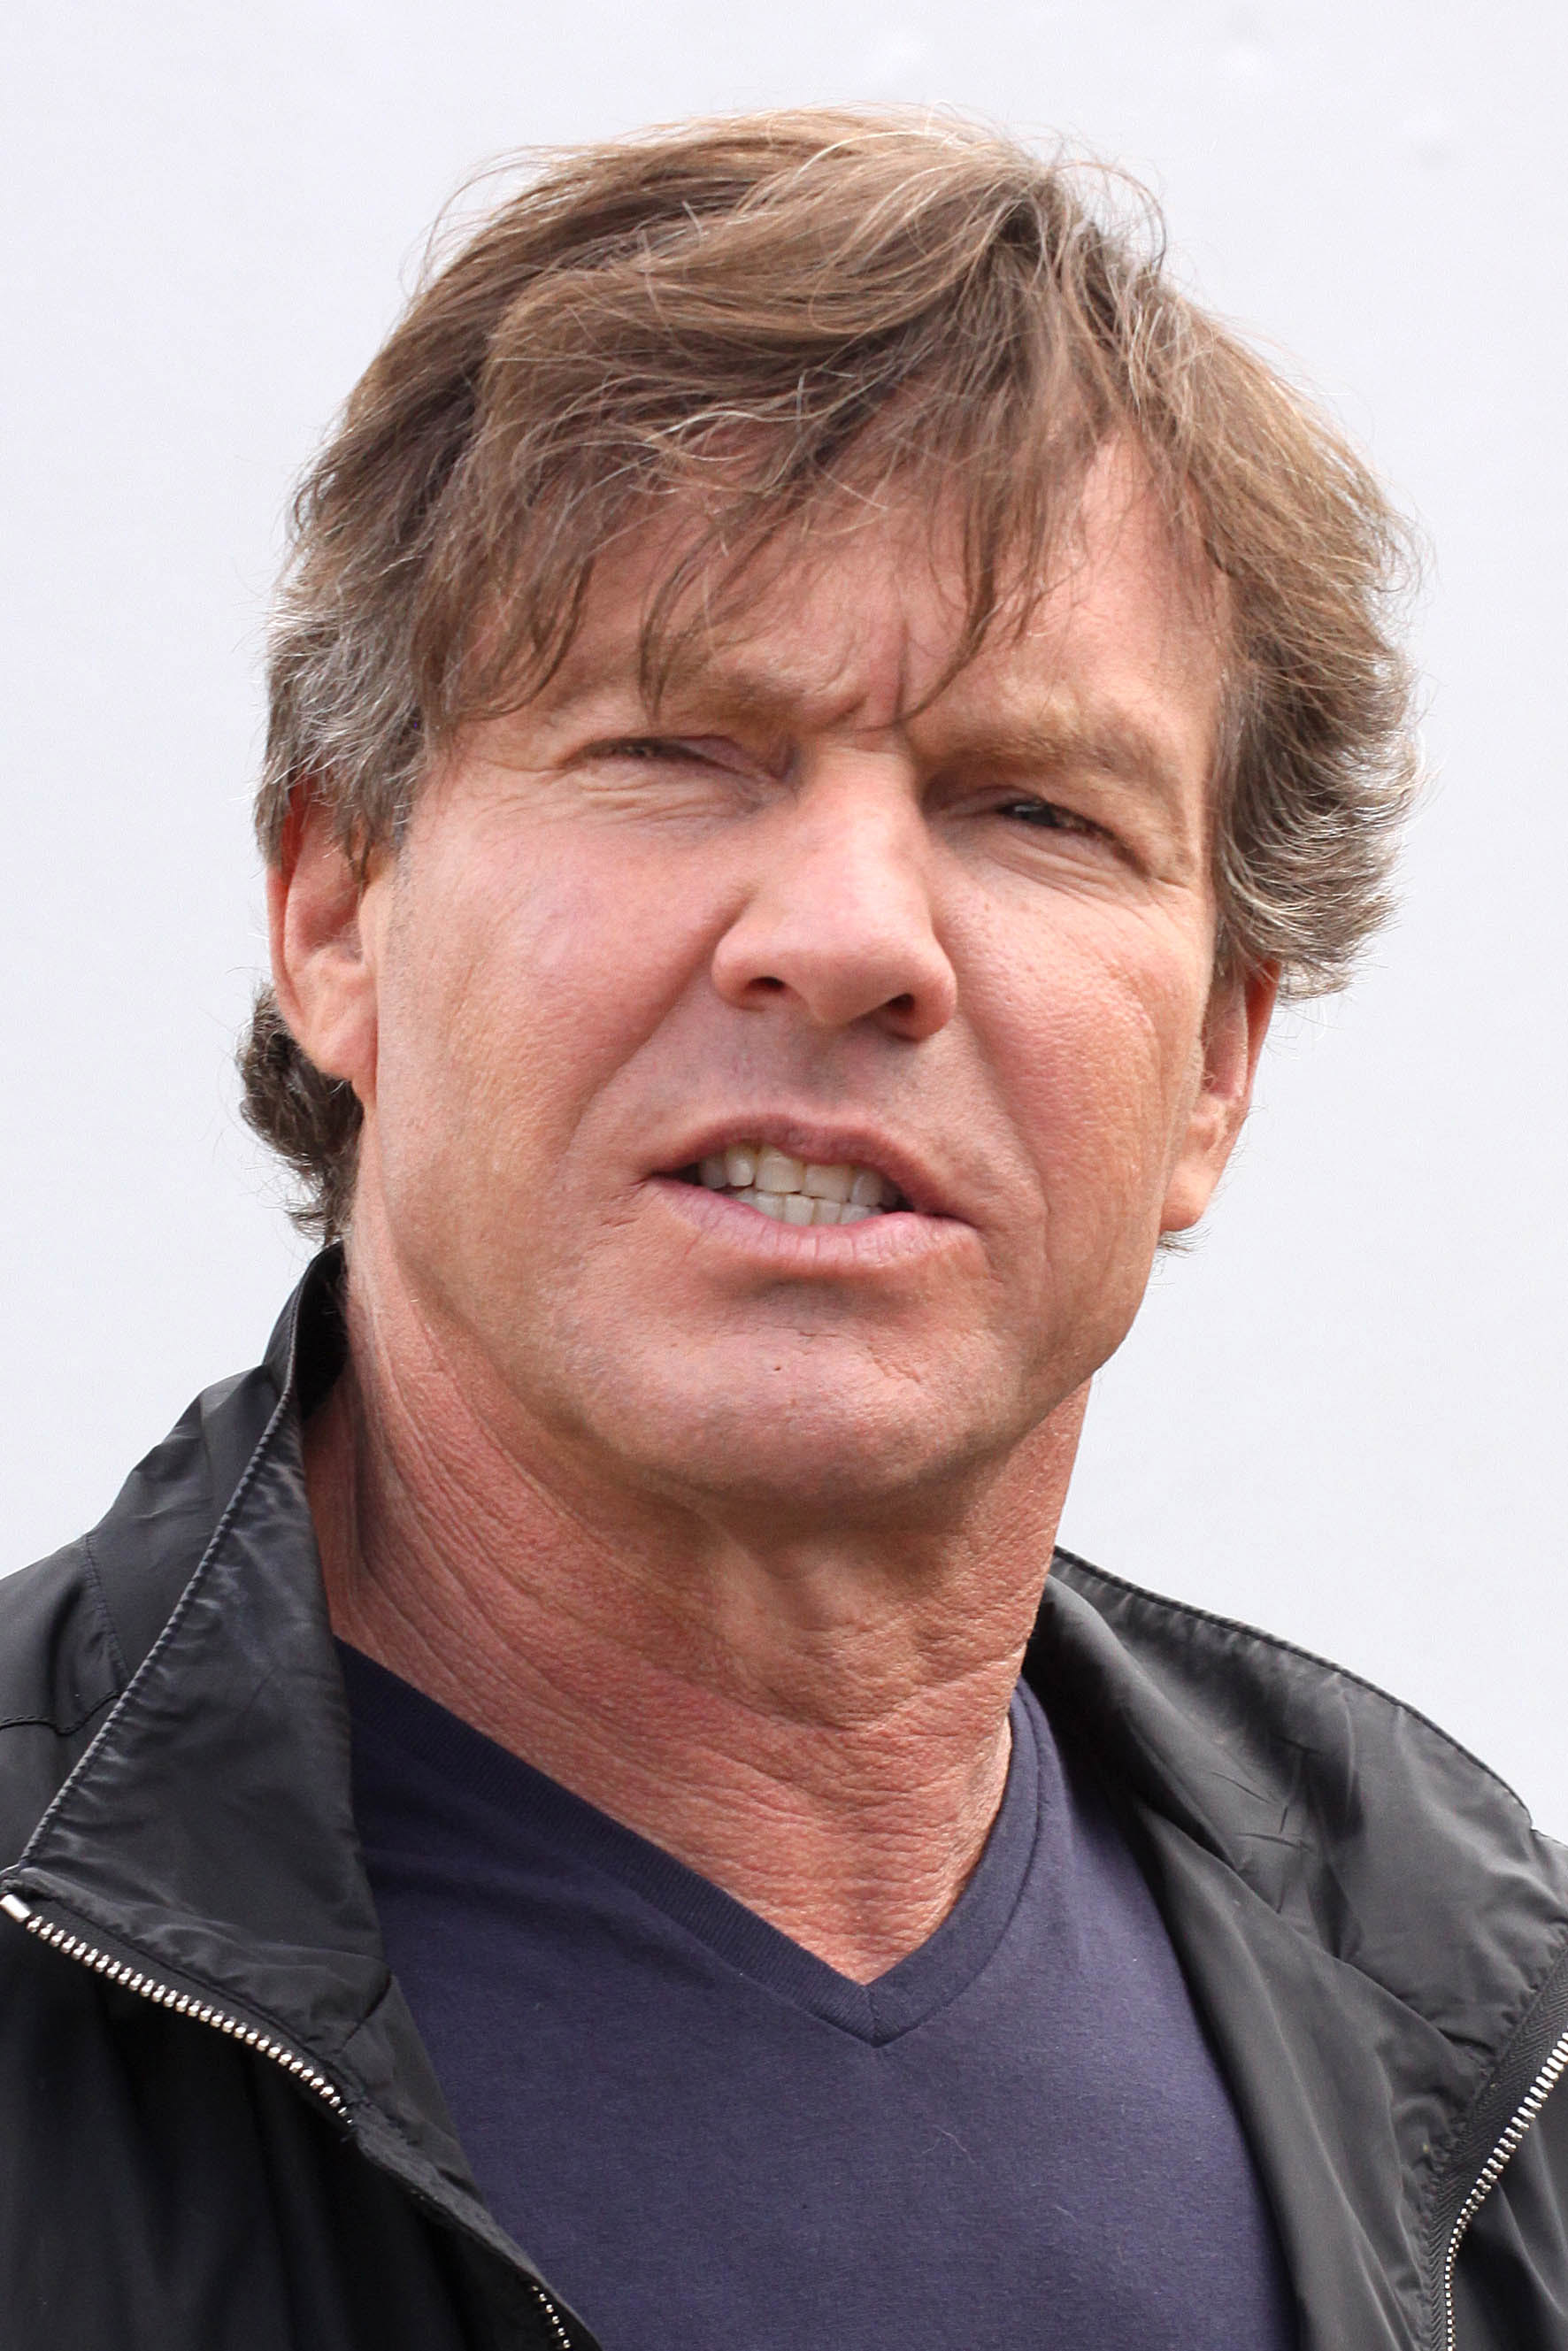 Dennis Quaid attends a photocall to launch on July 22, 2009 in London, England | Source: Getty Images